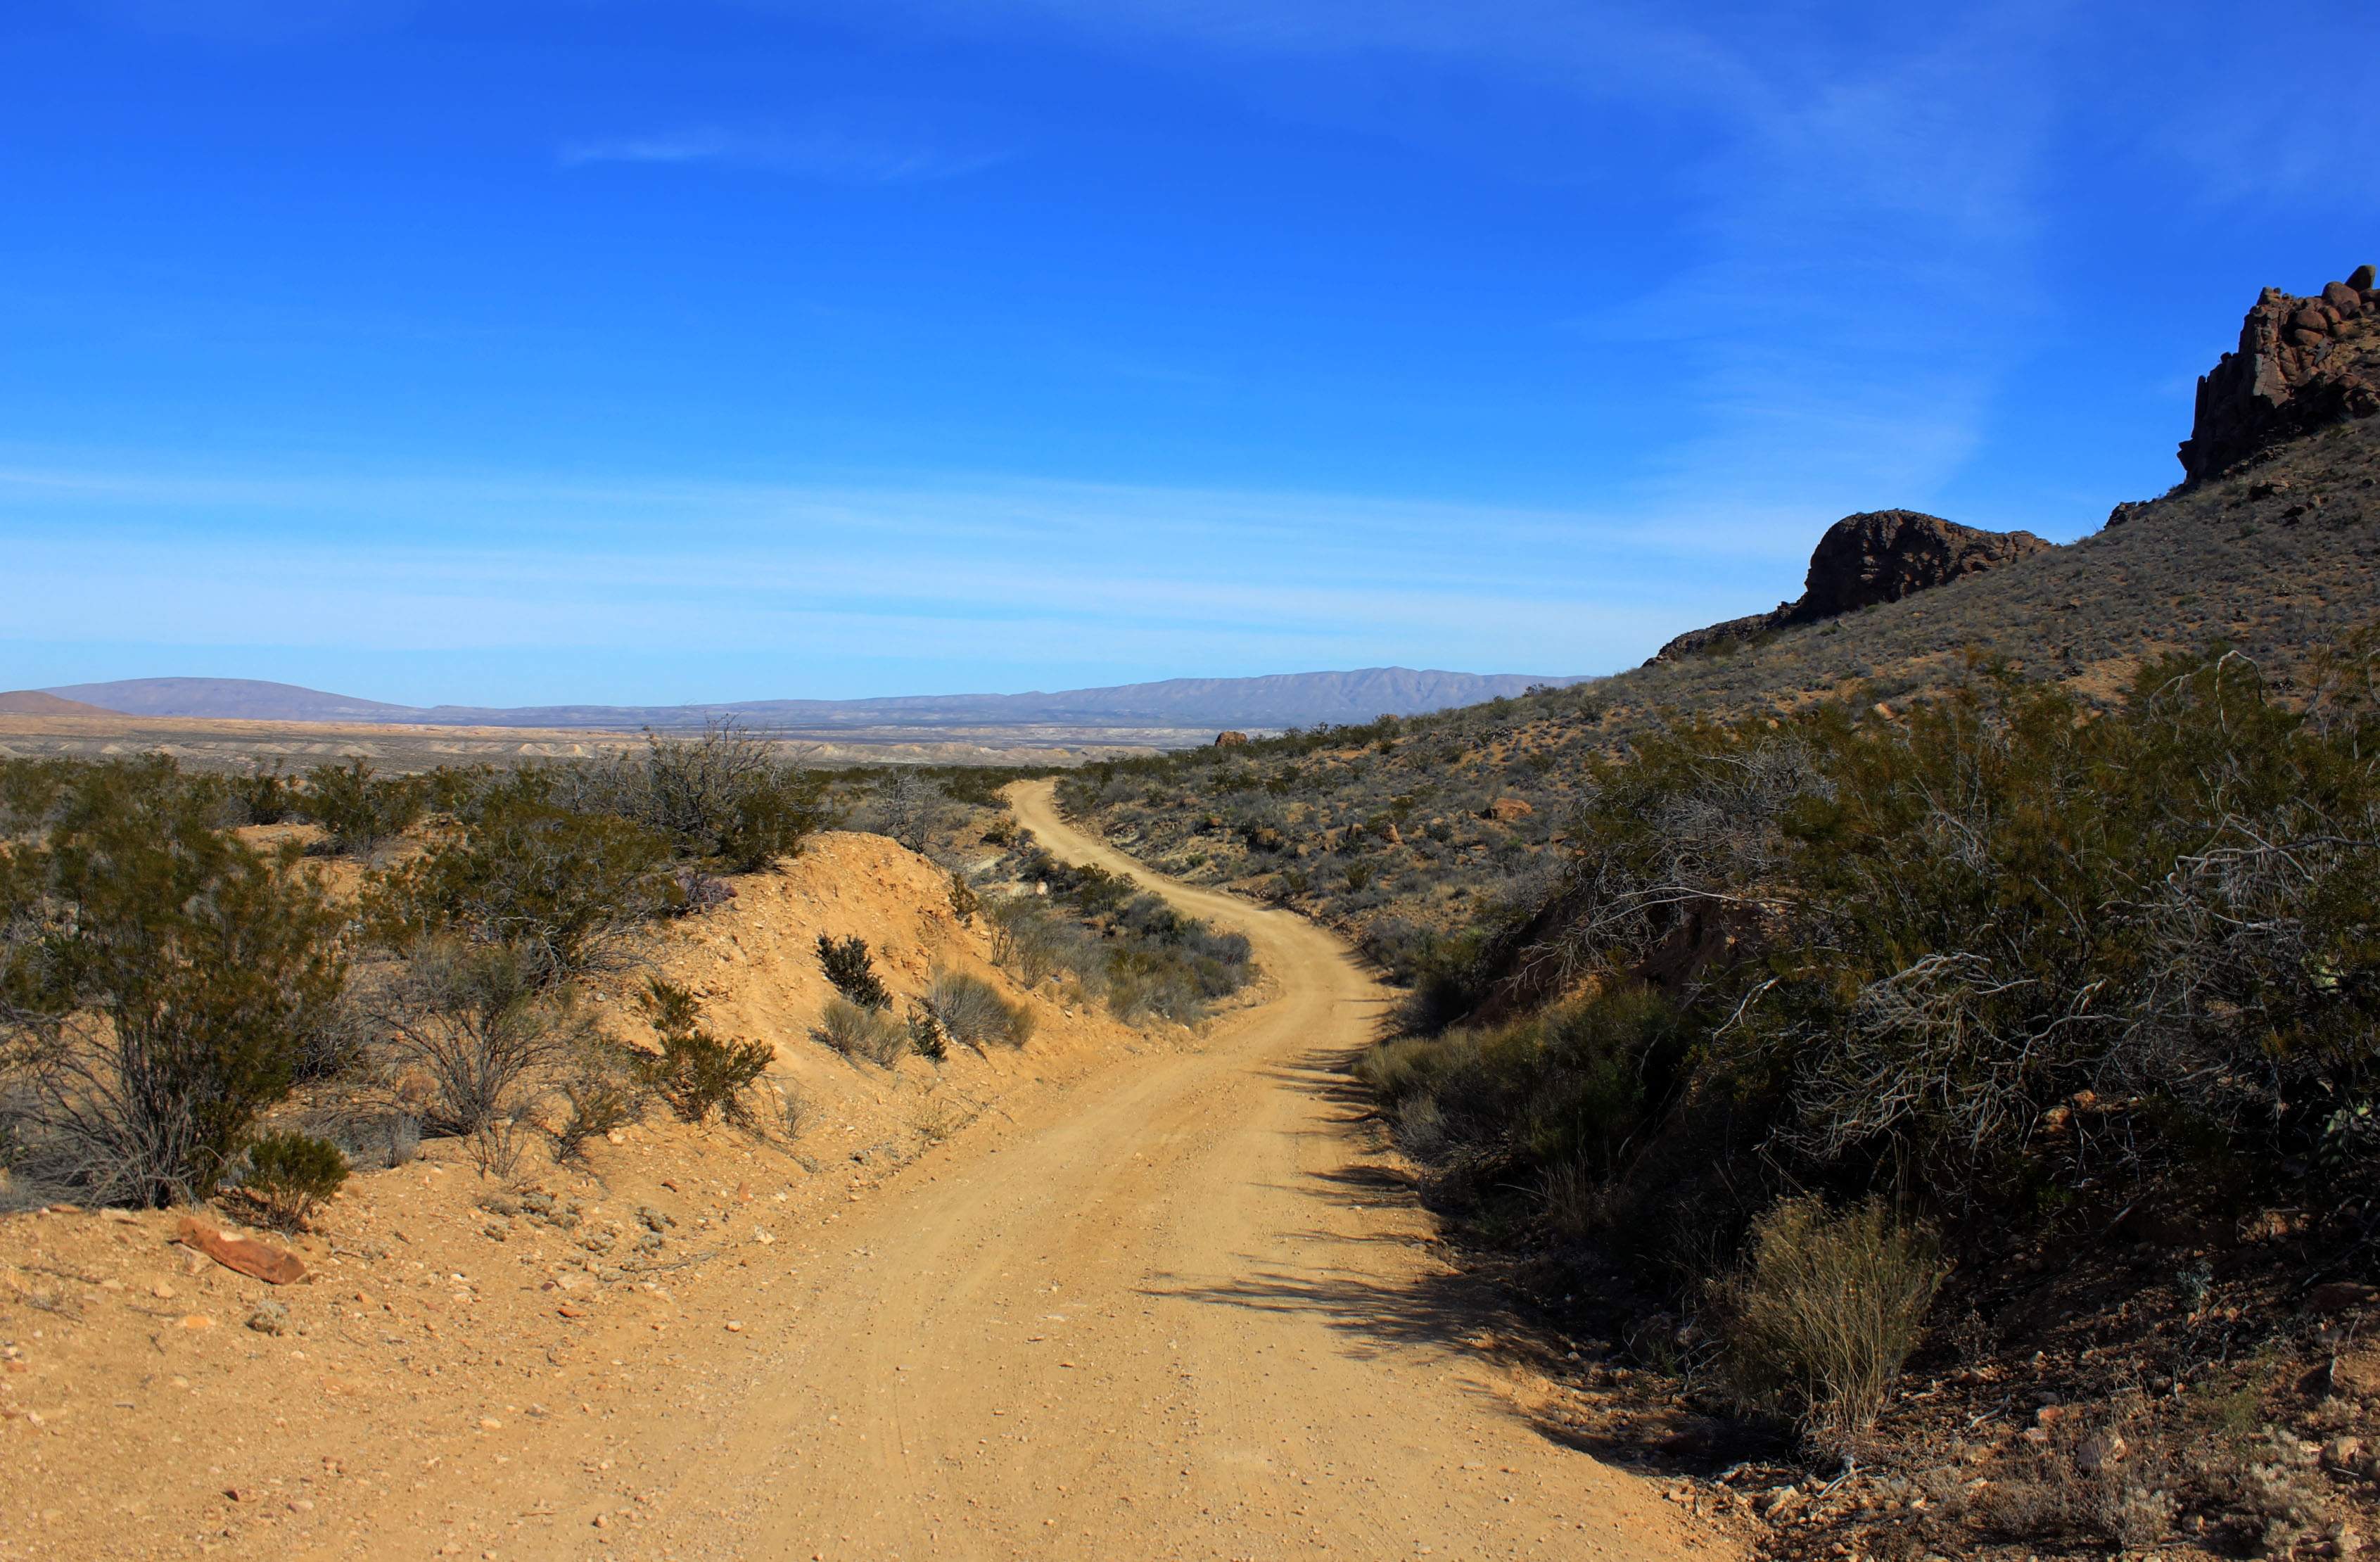 Path through the sands at Big Bend National Park, Texas image - Free ...